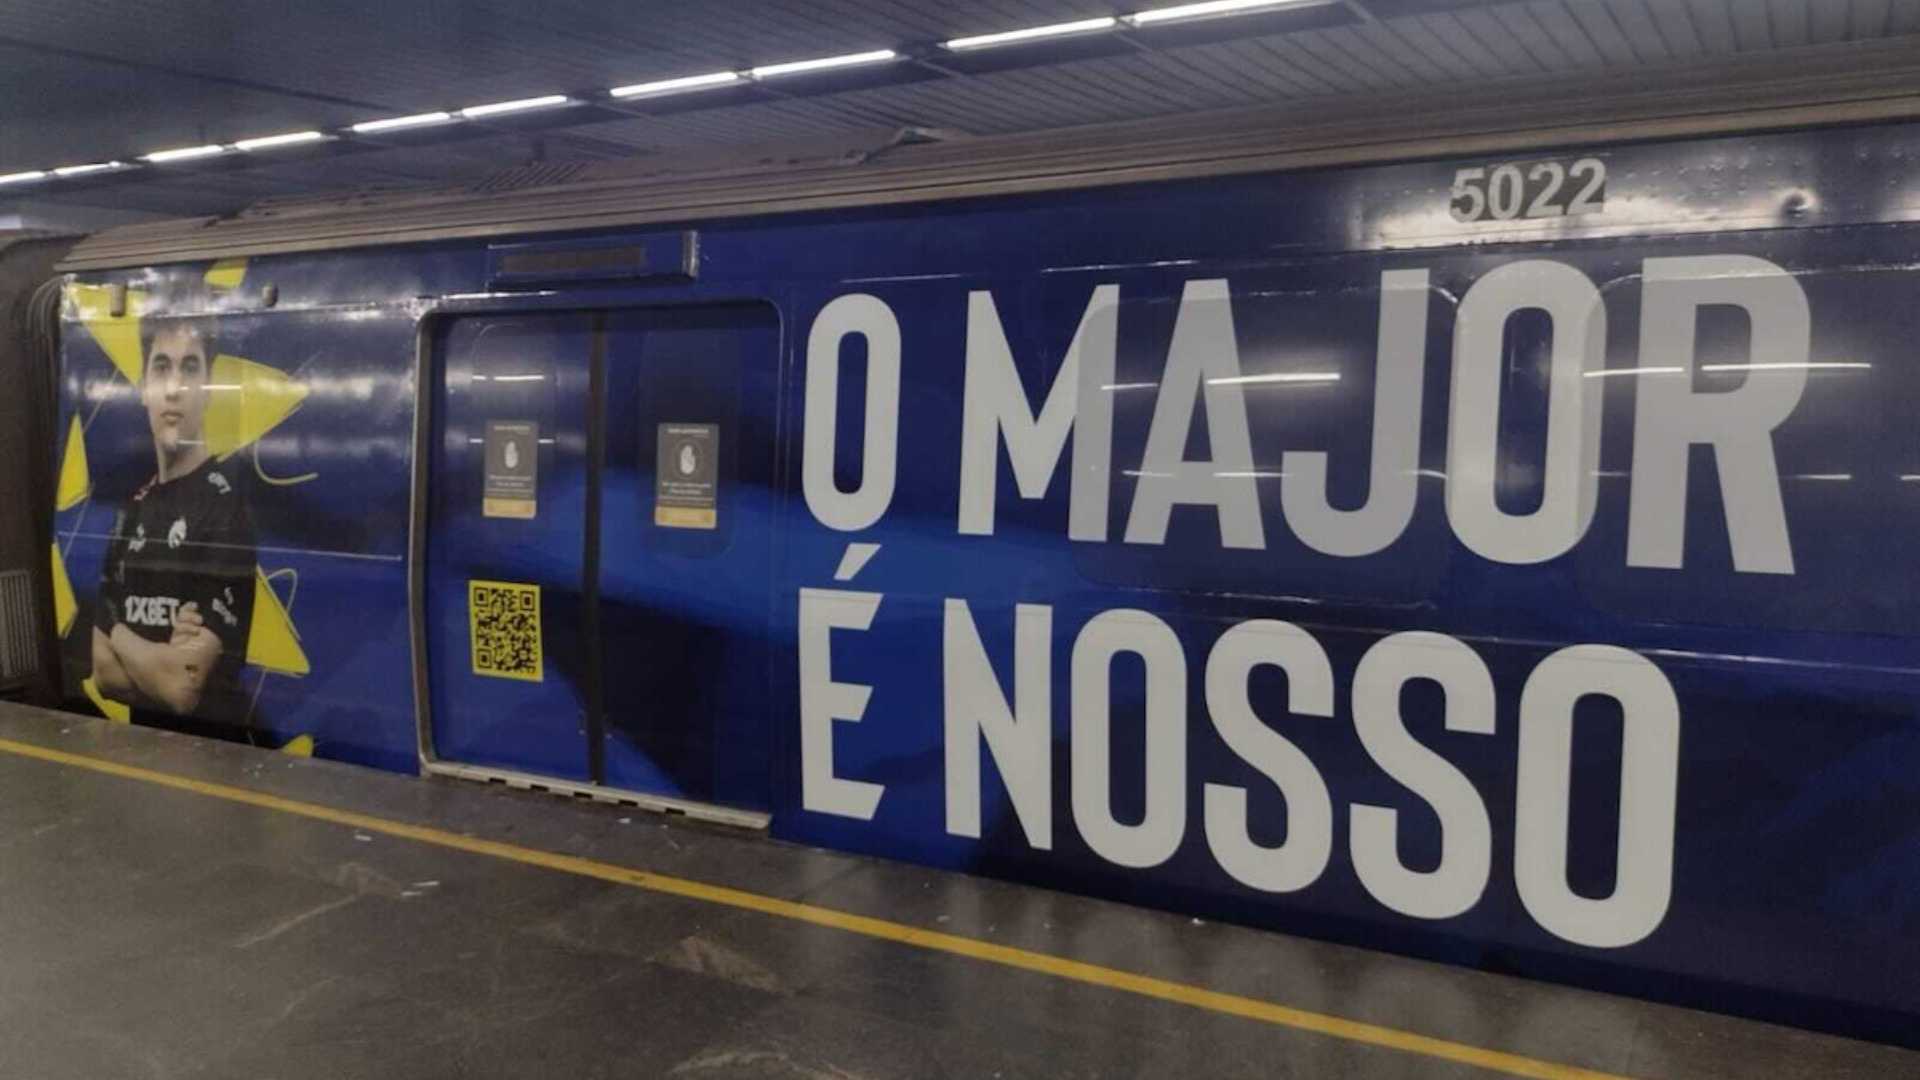 Featured image for “CSGO Major players featured on Rio trains”